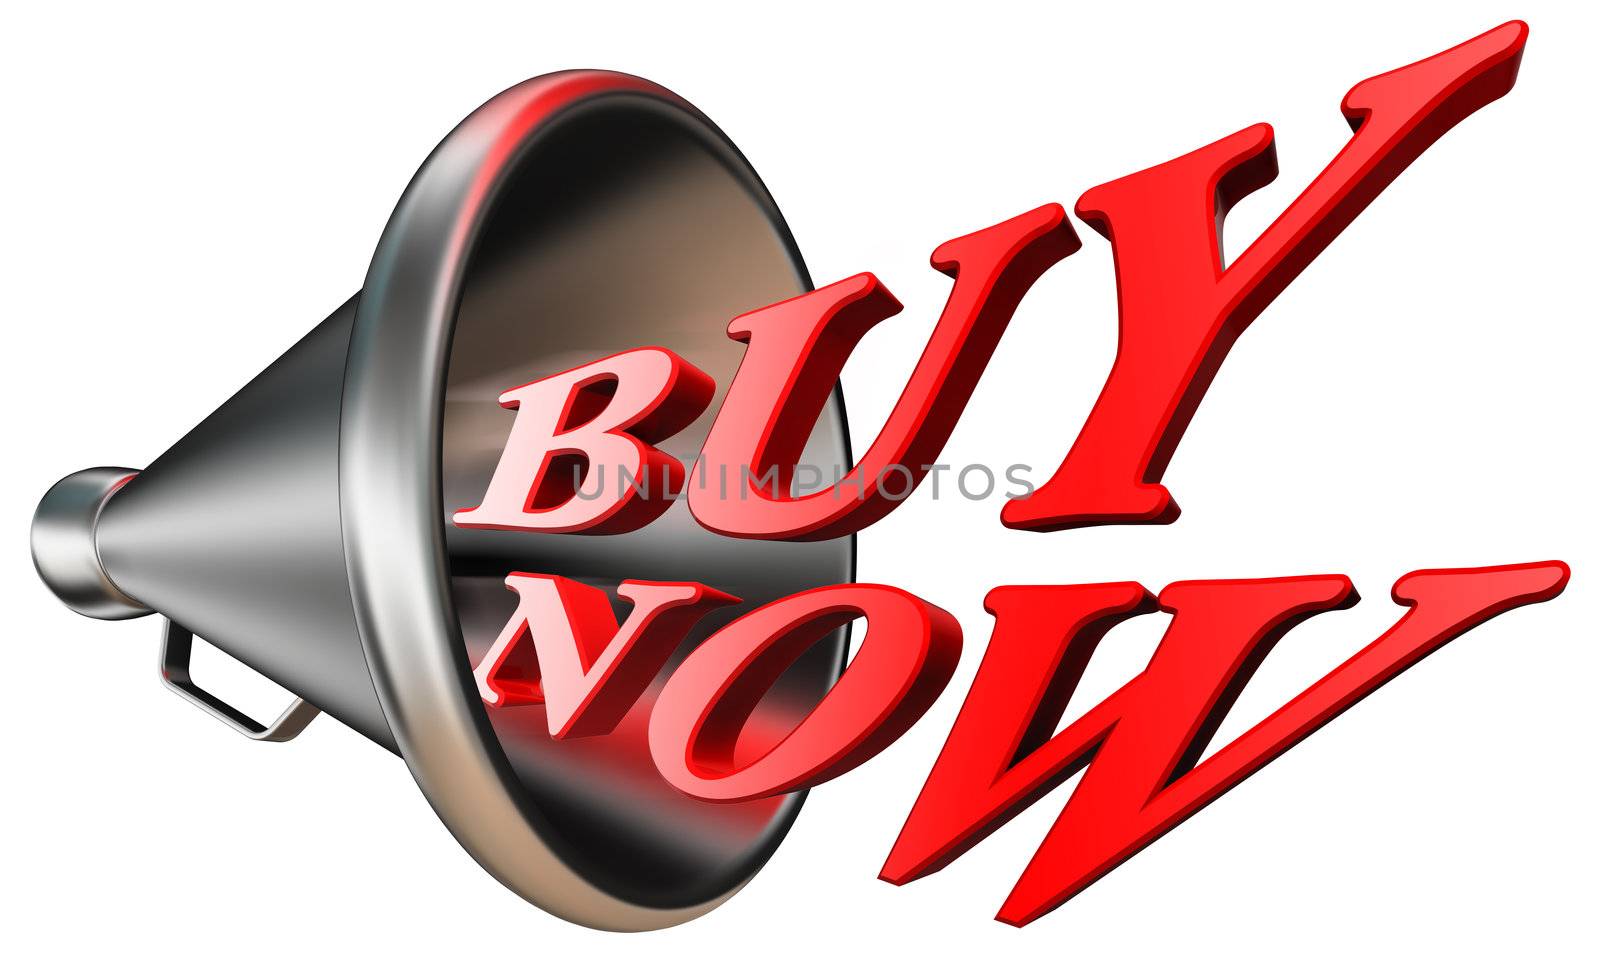 buy now red word in megaphone isolated on white background. clipping path included